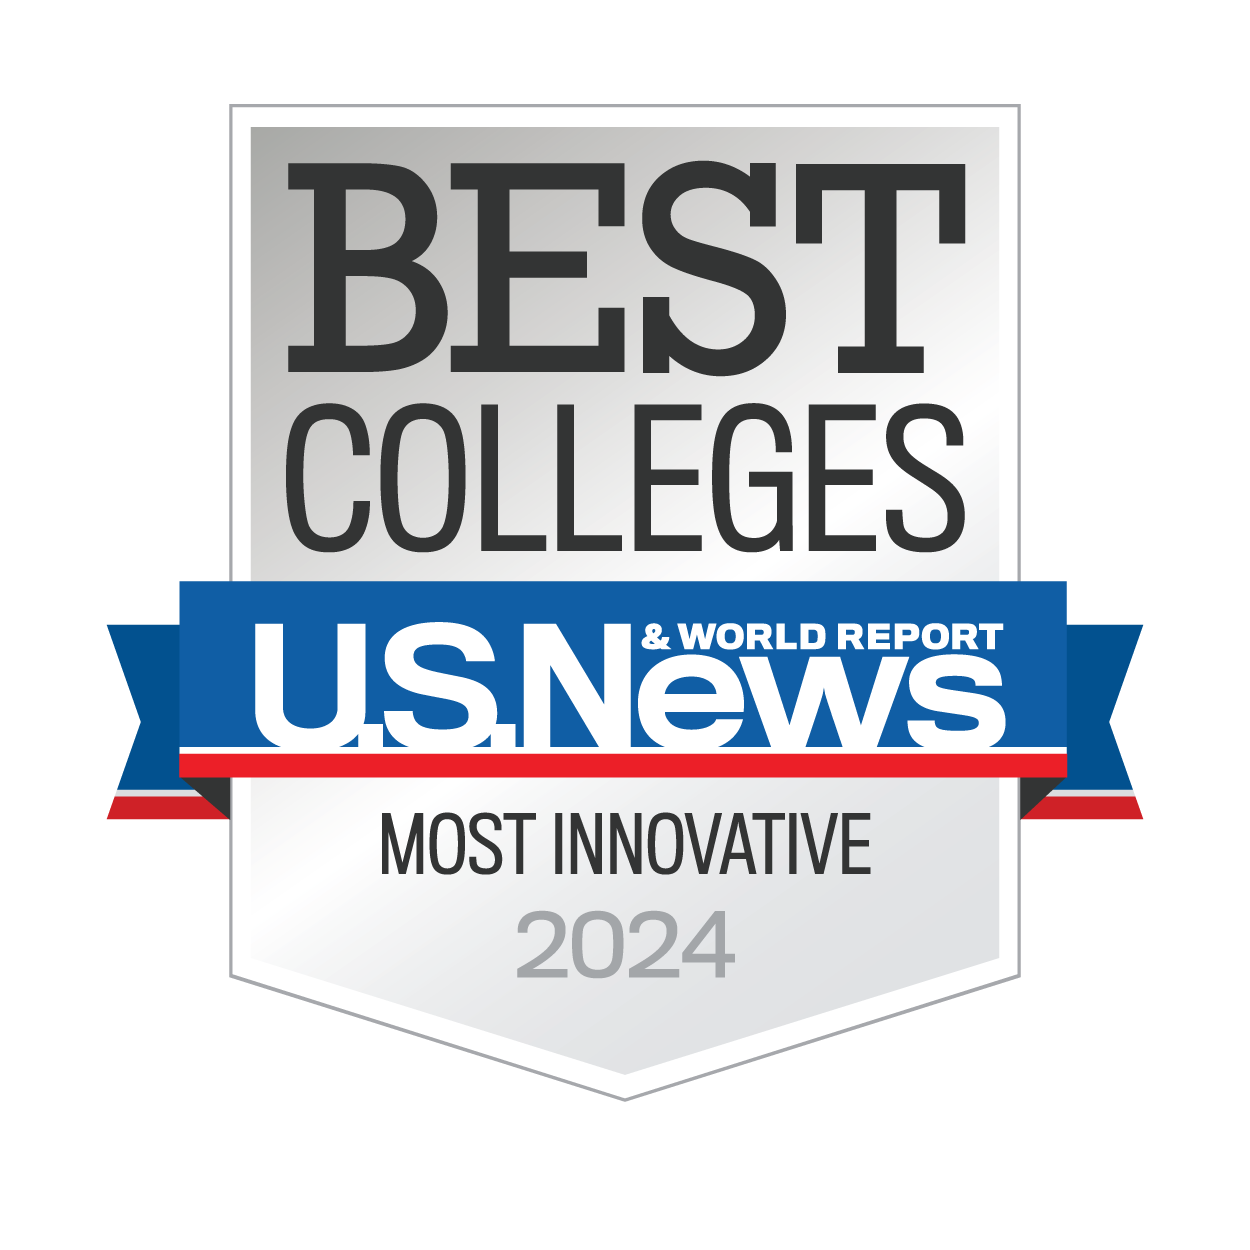 U.S. News Best Colleges badge for most innovative colleges 2024